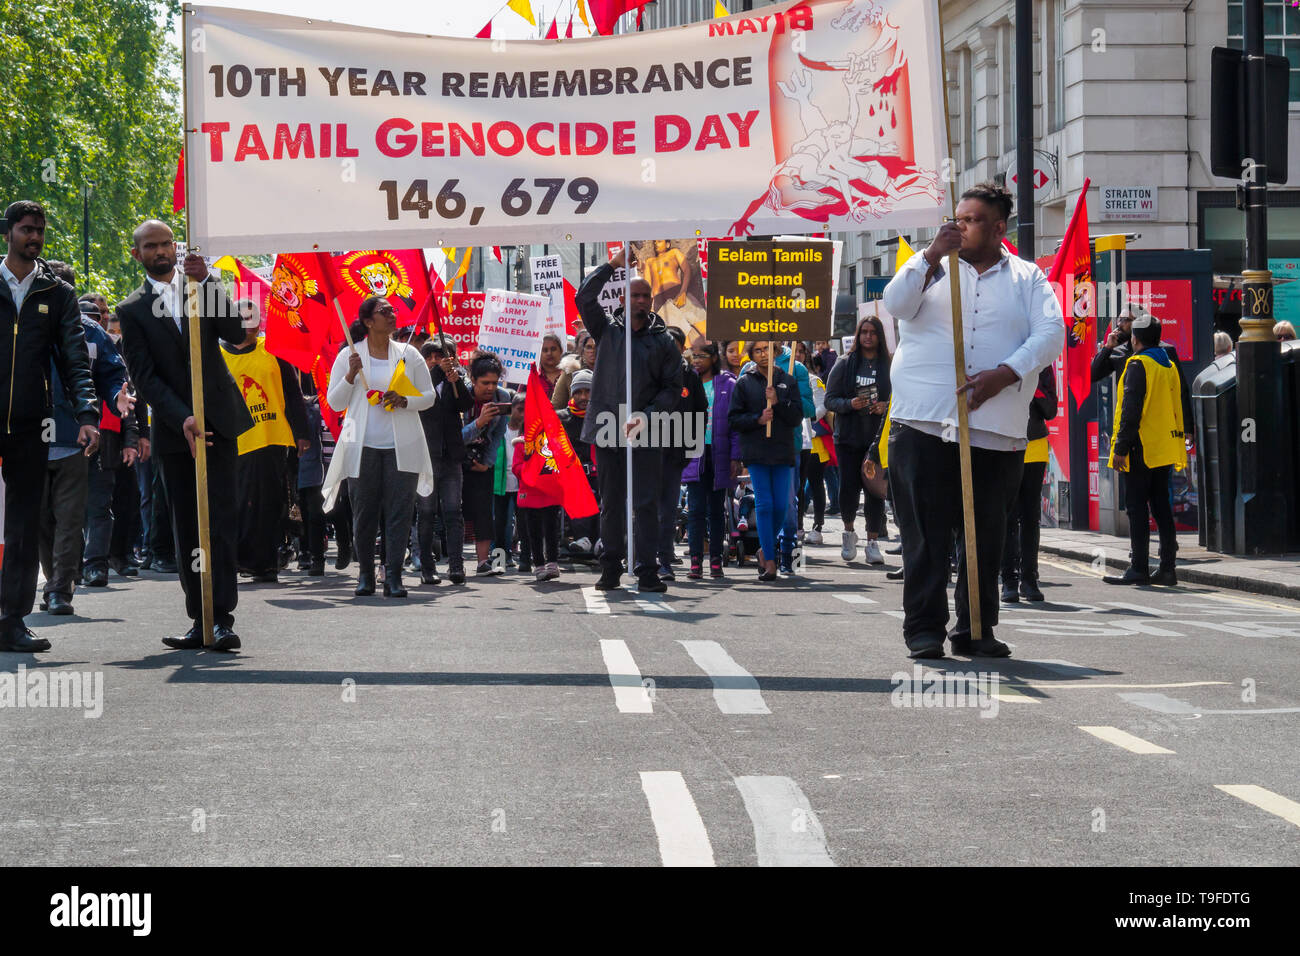 London, UK. 18th May 2019. Several thousand Tamils, many with Tamil Eelam flags, march up Piccadilly on Mullivaikkal Remembrance Day in memory of those killed by Sri Lanka’s genocidal war against the Tamils, which ended ten years ago. They call for a political solution which gives Tamils back control of their homeland of Tamil Eelam, and for an end to the ban on the Tamil Tigers. Public commemorations of the many thousands of war dead are forbidden in Sri Lanka. Peter Marshall/Alamy Live News Stock Photo